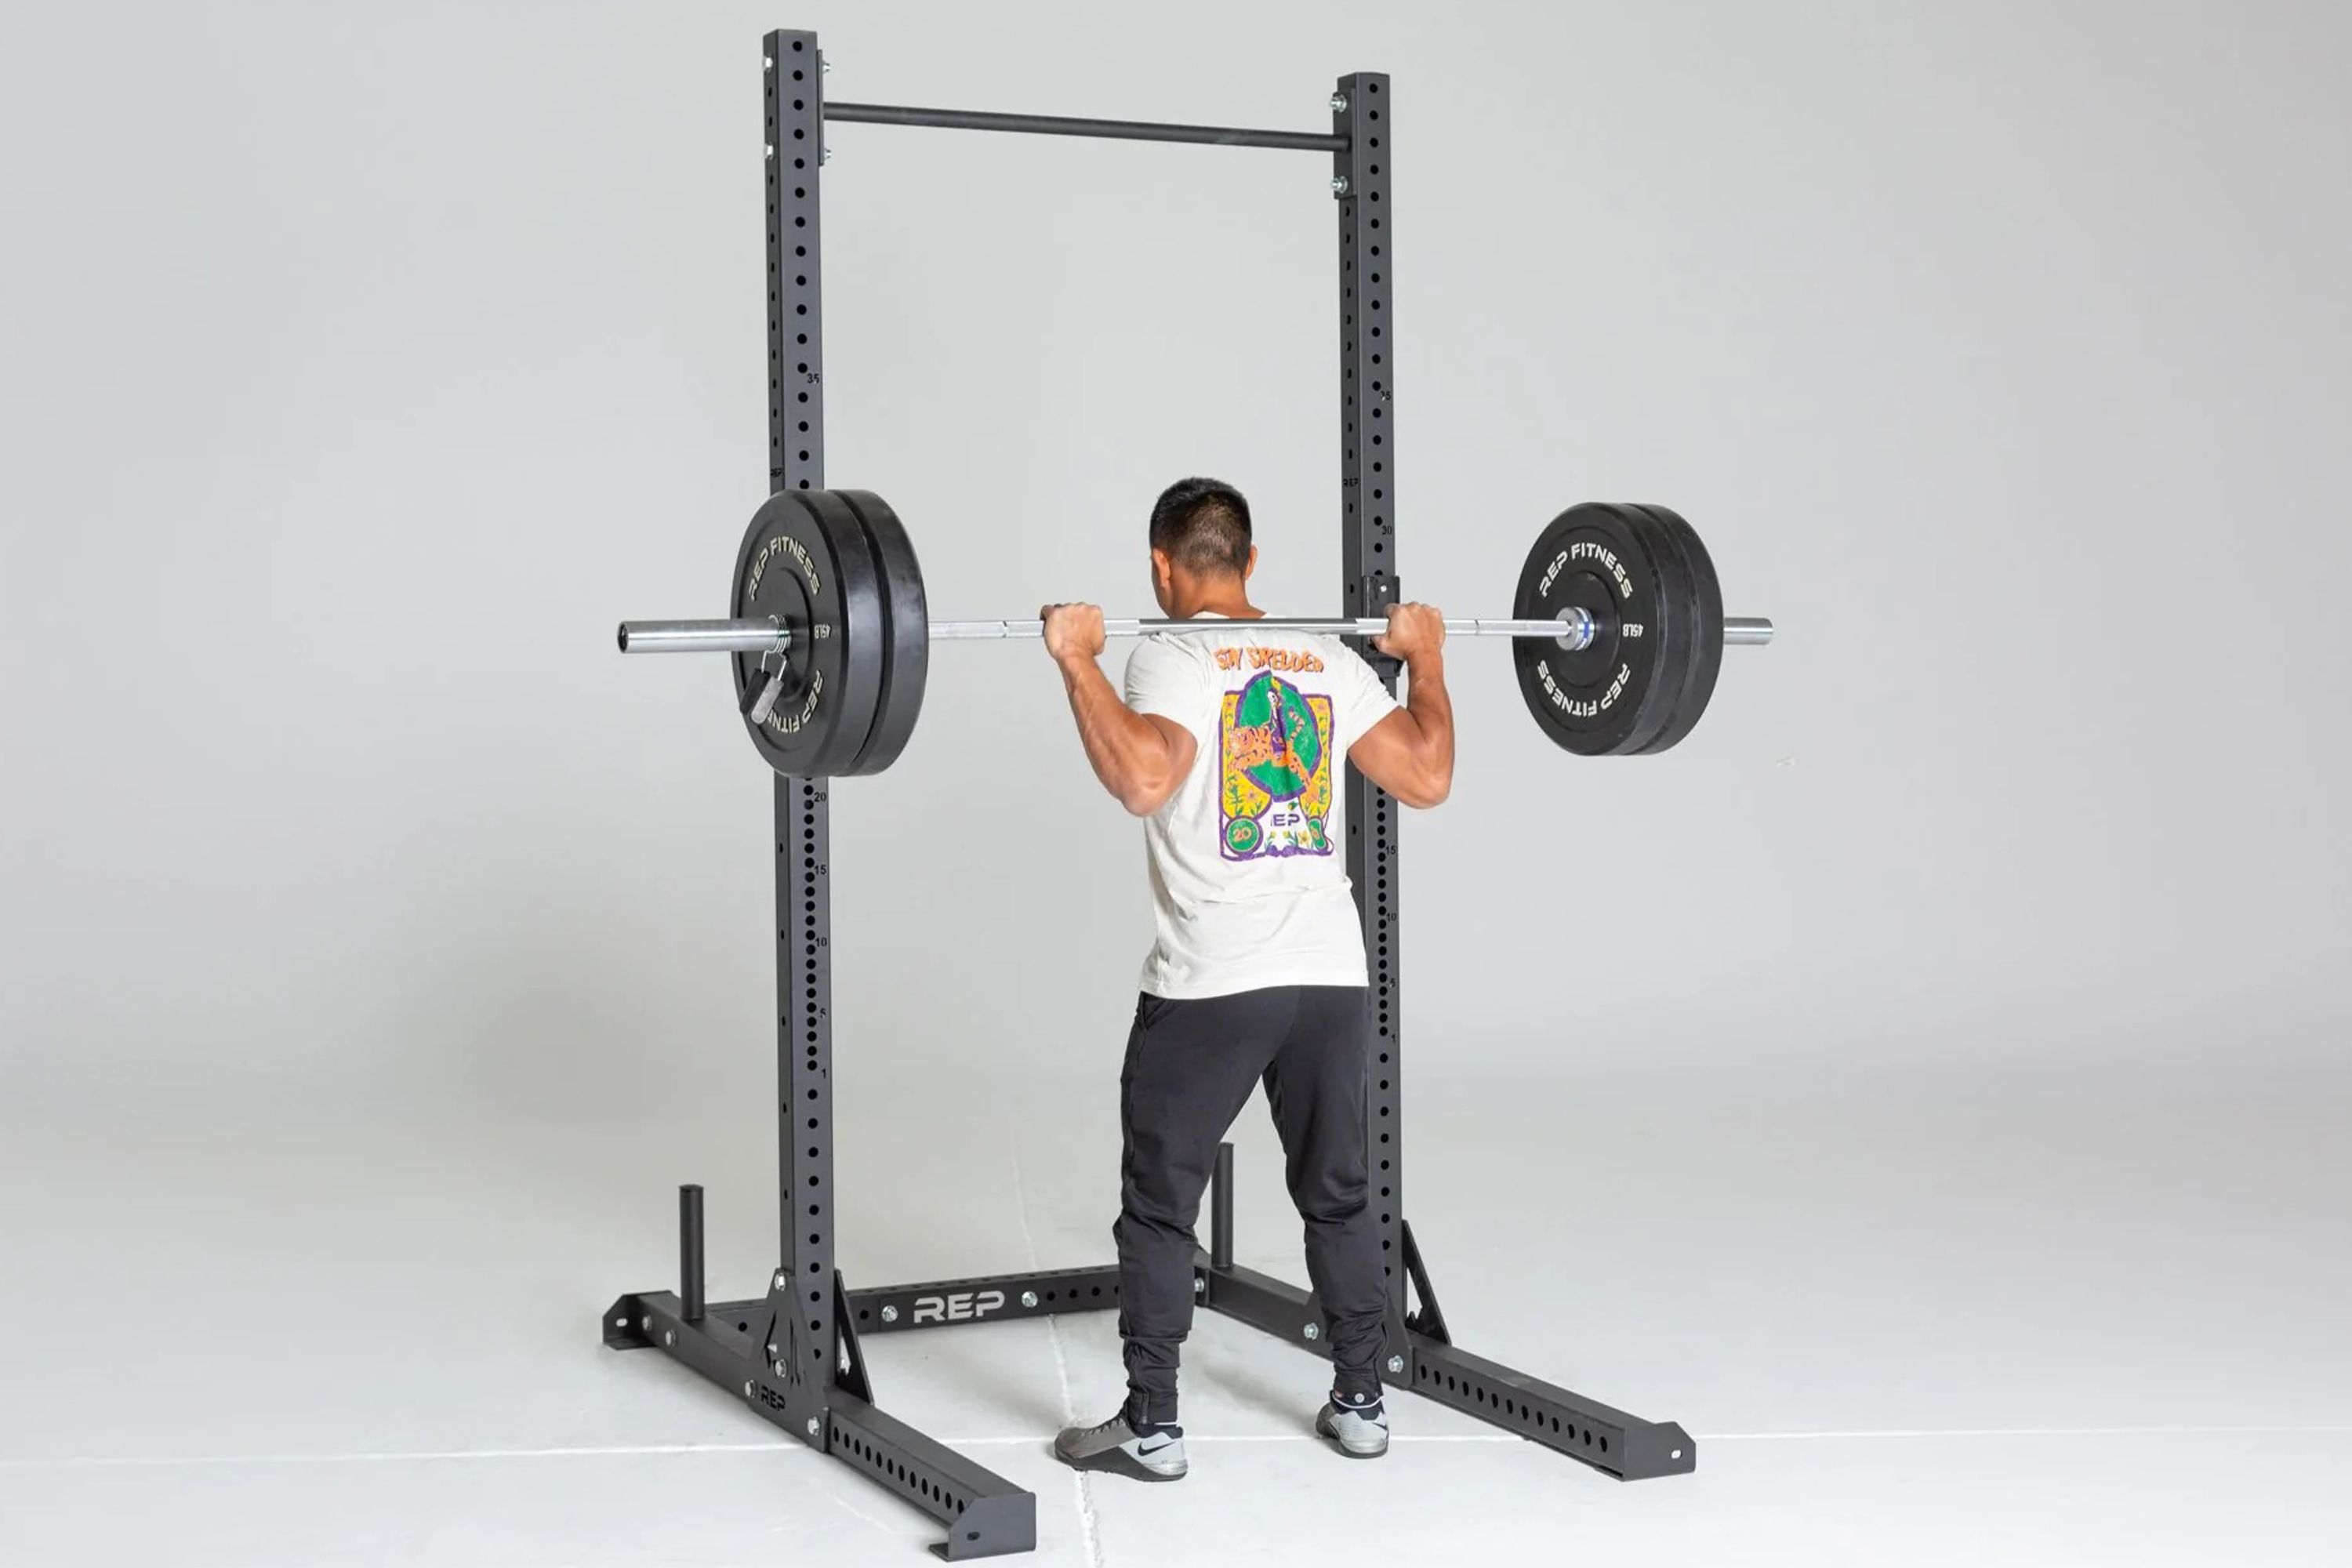 The Best Squat for Pumping Your Home